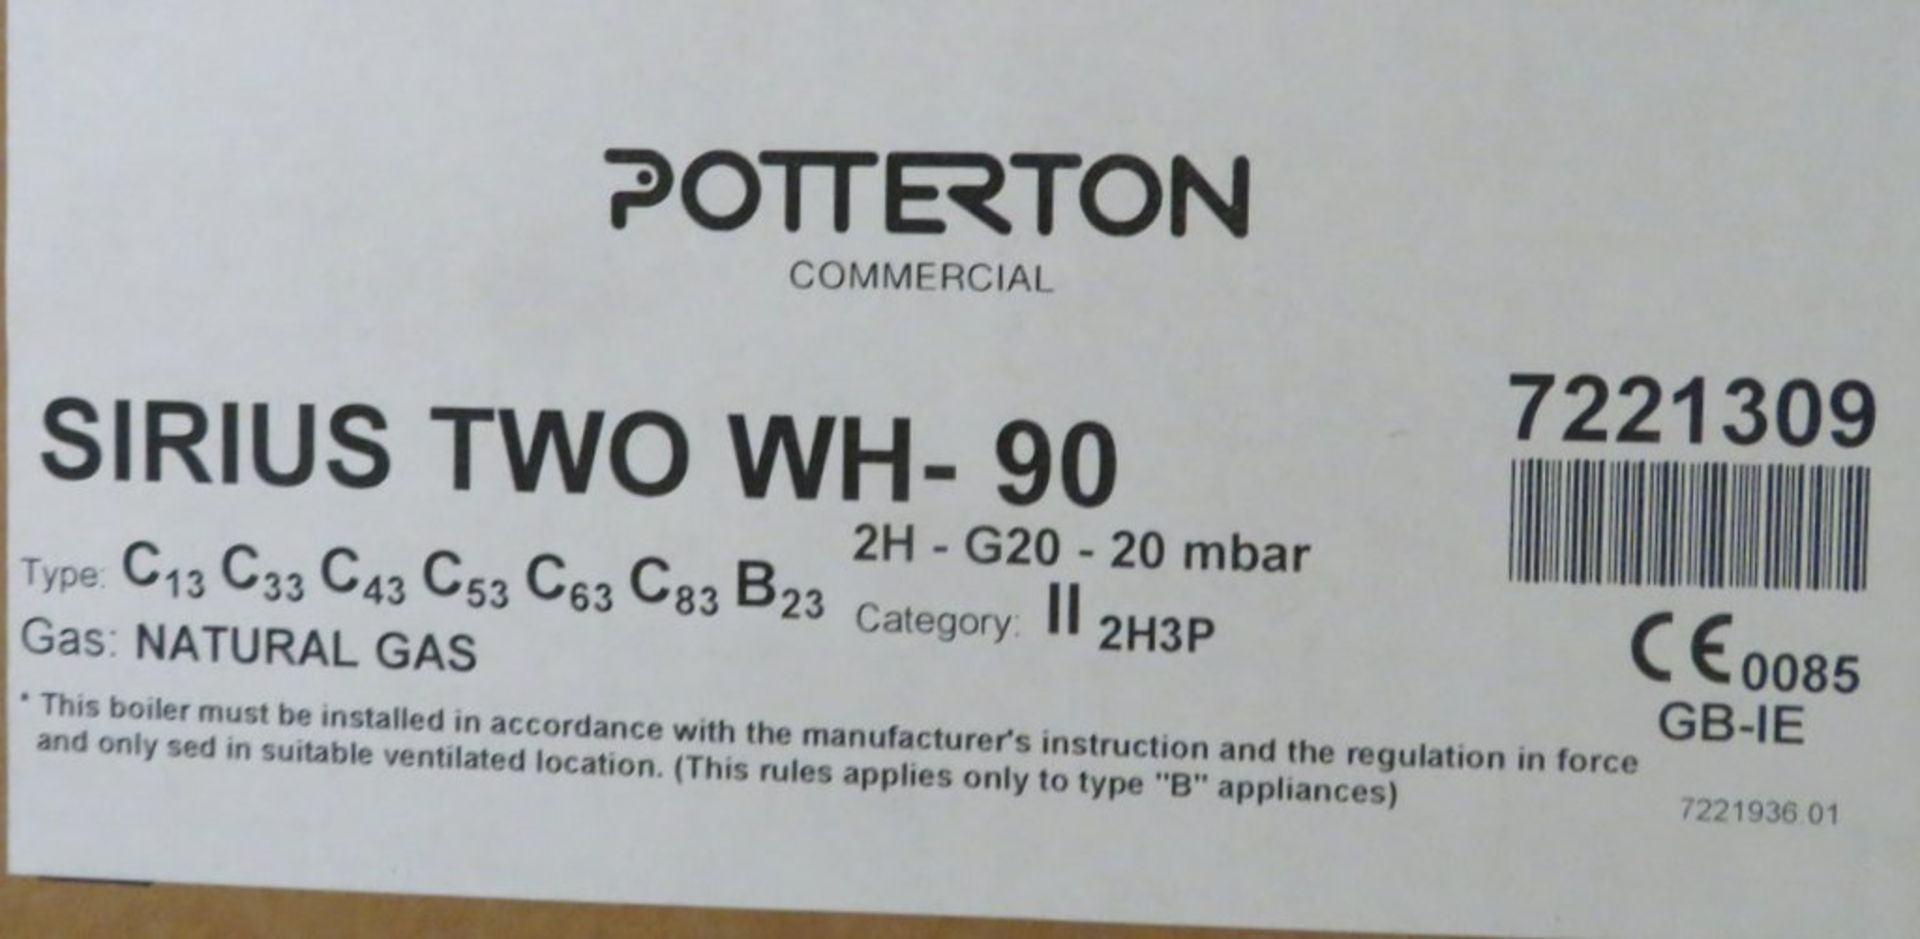 Potterton Sirius Two 90kw gas boiler, new in box, rrp £2370 - Image 3 of 3